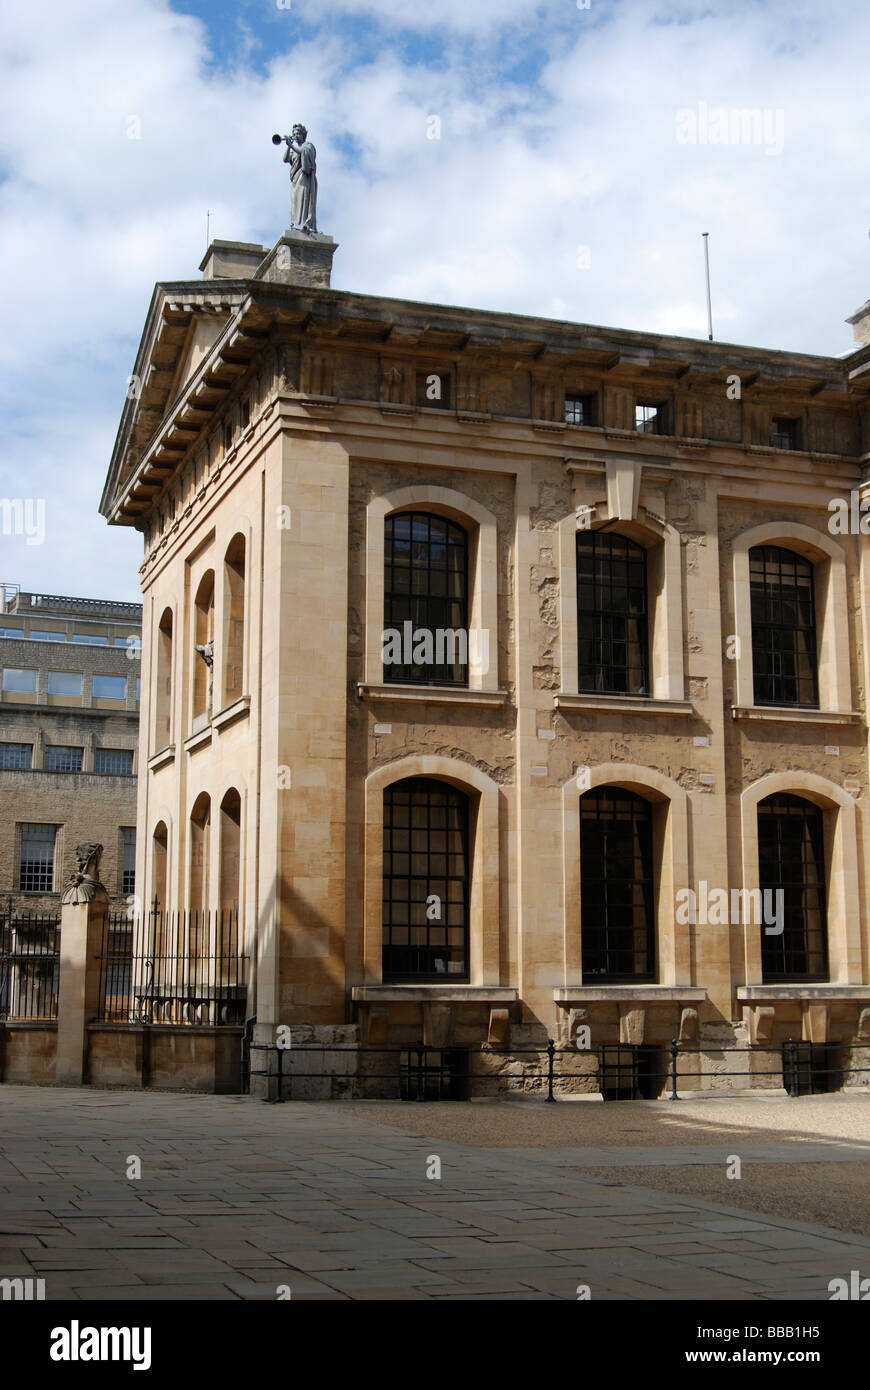 The Clarendon building in Oxford, originally housed the Oxford University Press but now used by the Bodleian Library Stock Photo